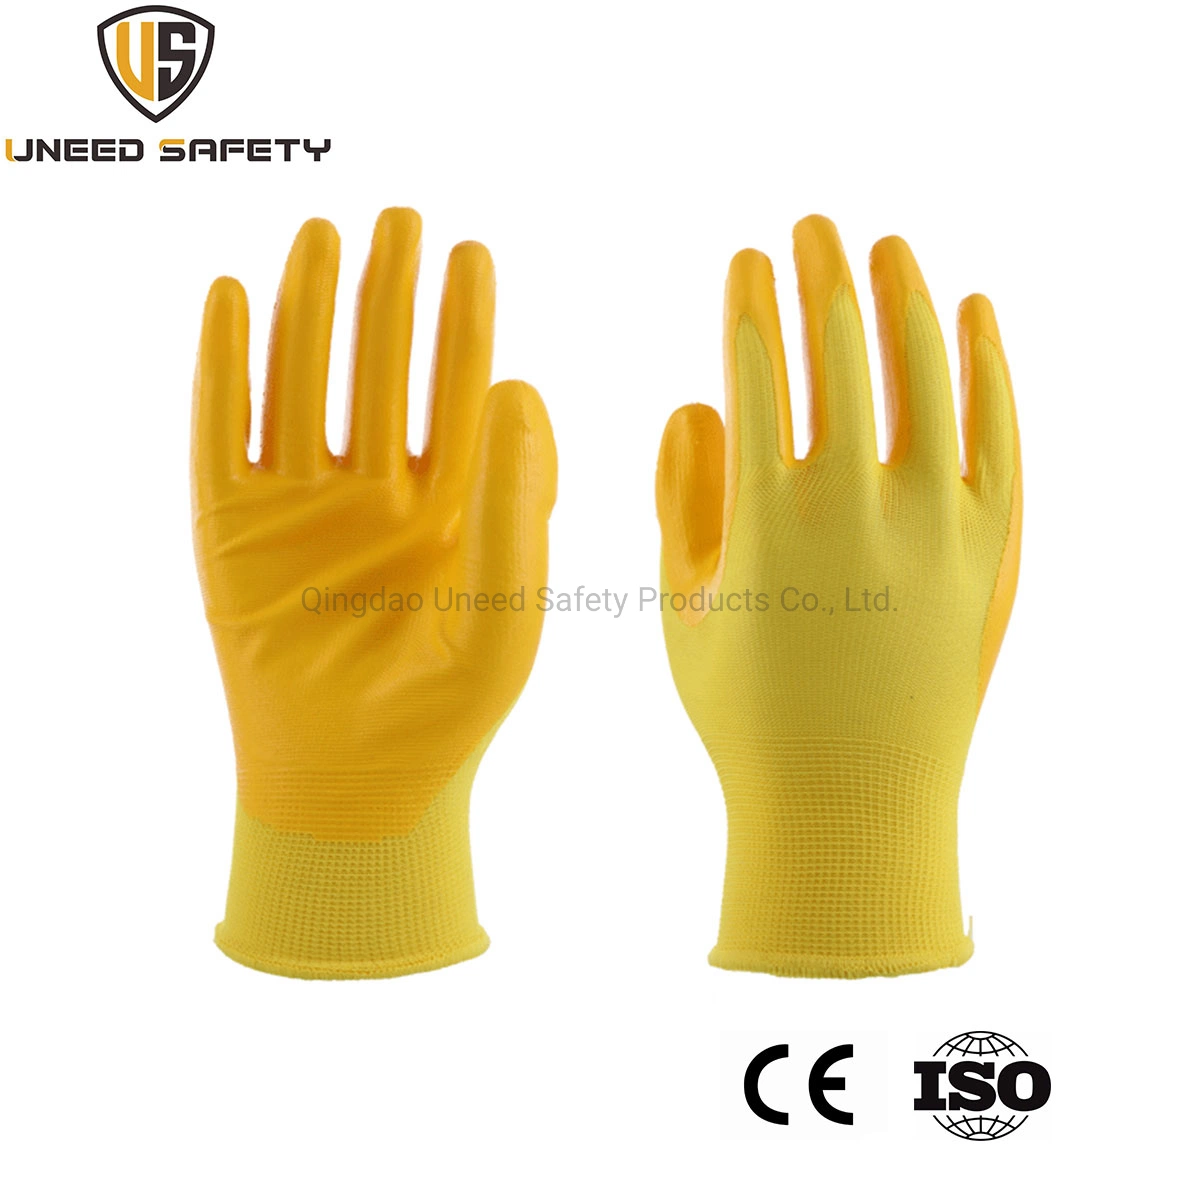 Graden Yellow Nylon Industrial Working Nitrile Dipped Safety Work Gloves